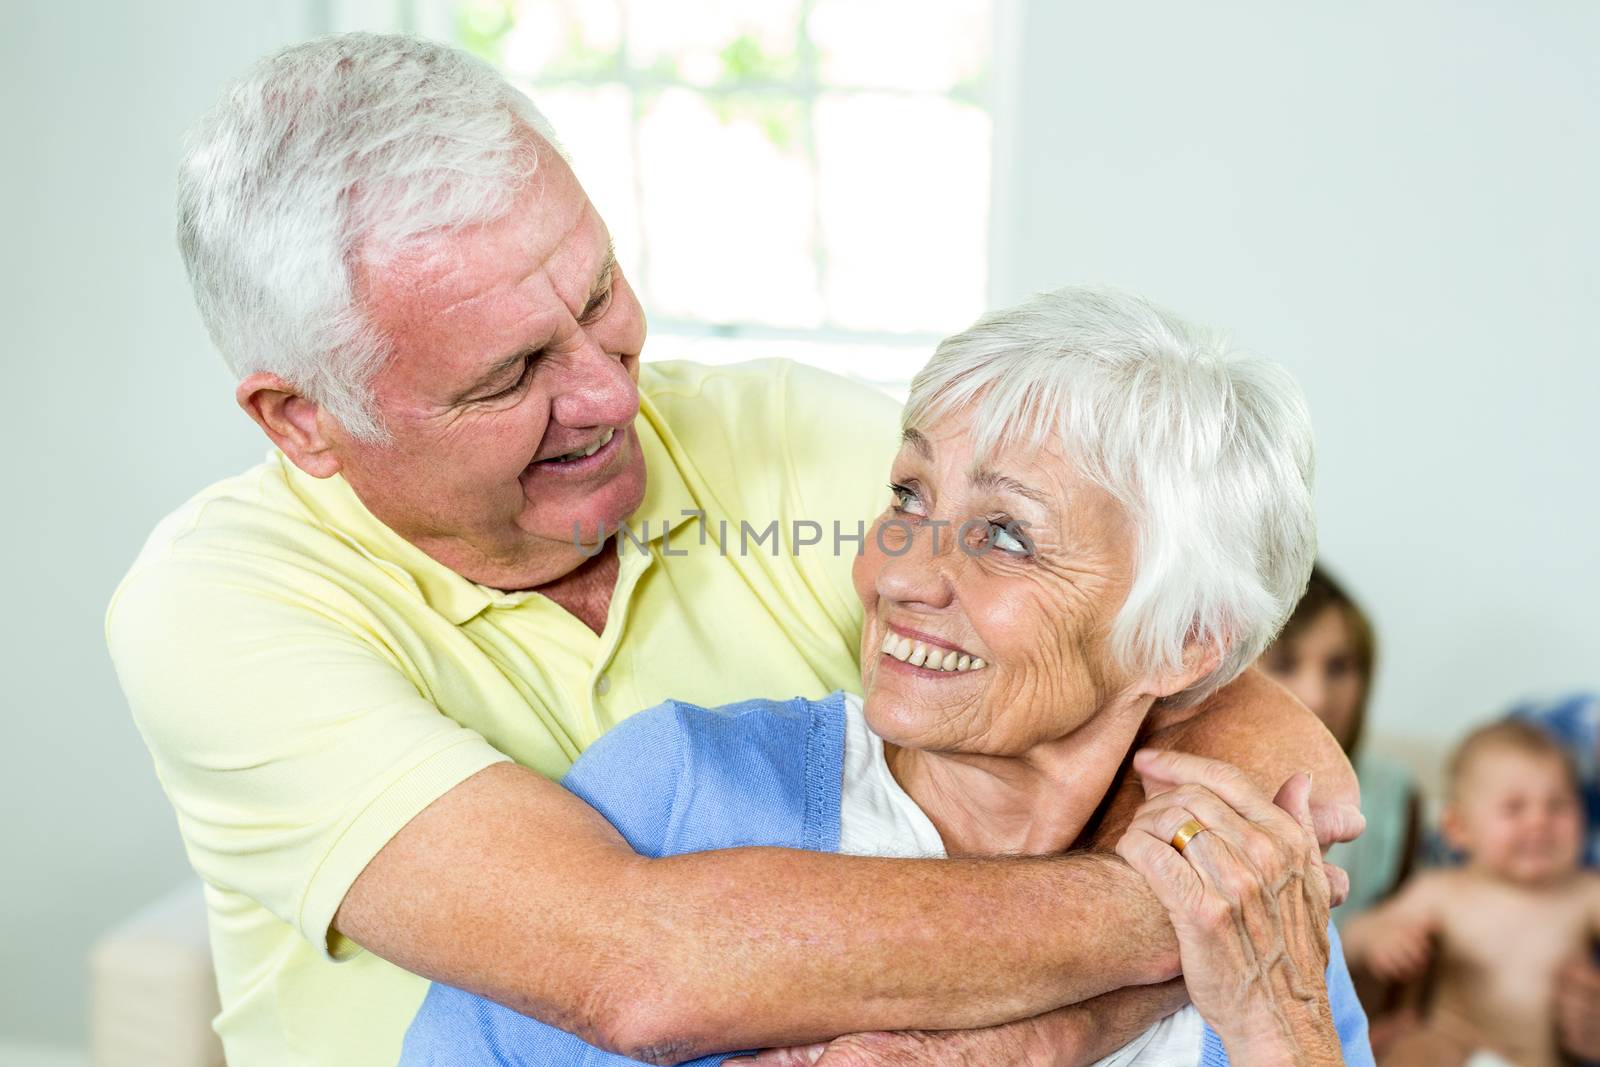 Happy couple embracing while family in background by Wavebreakmedia